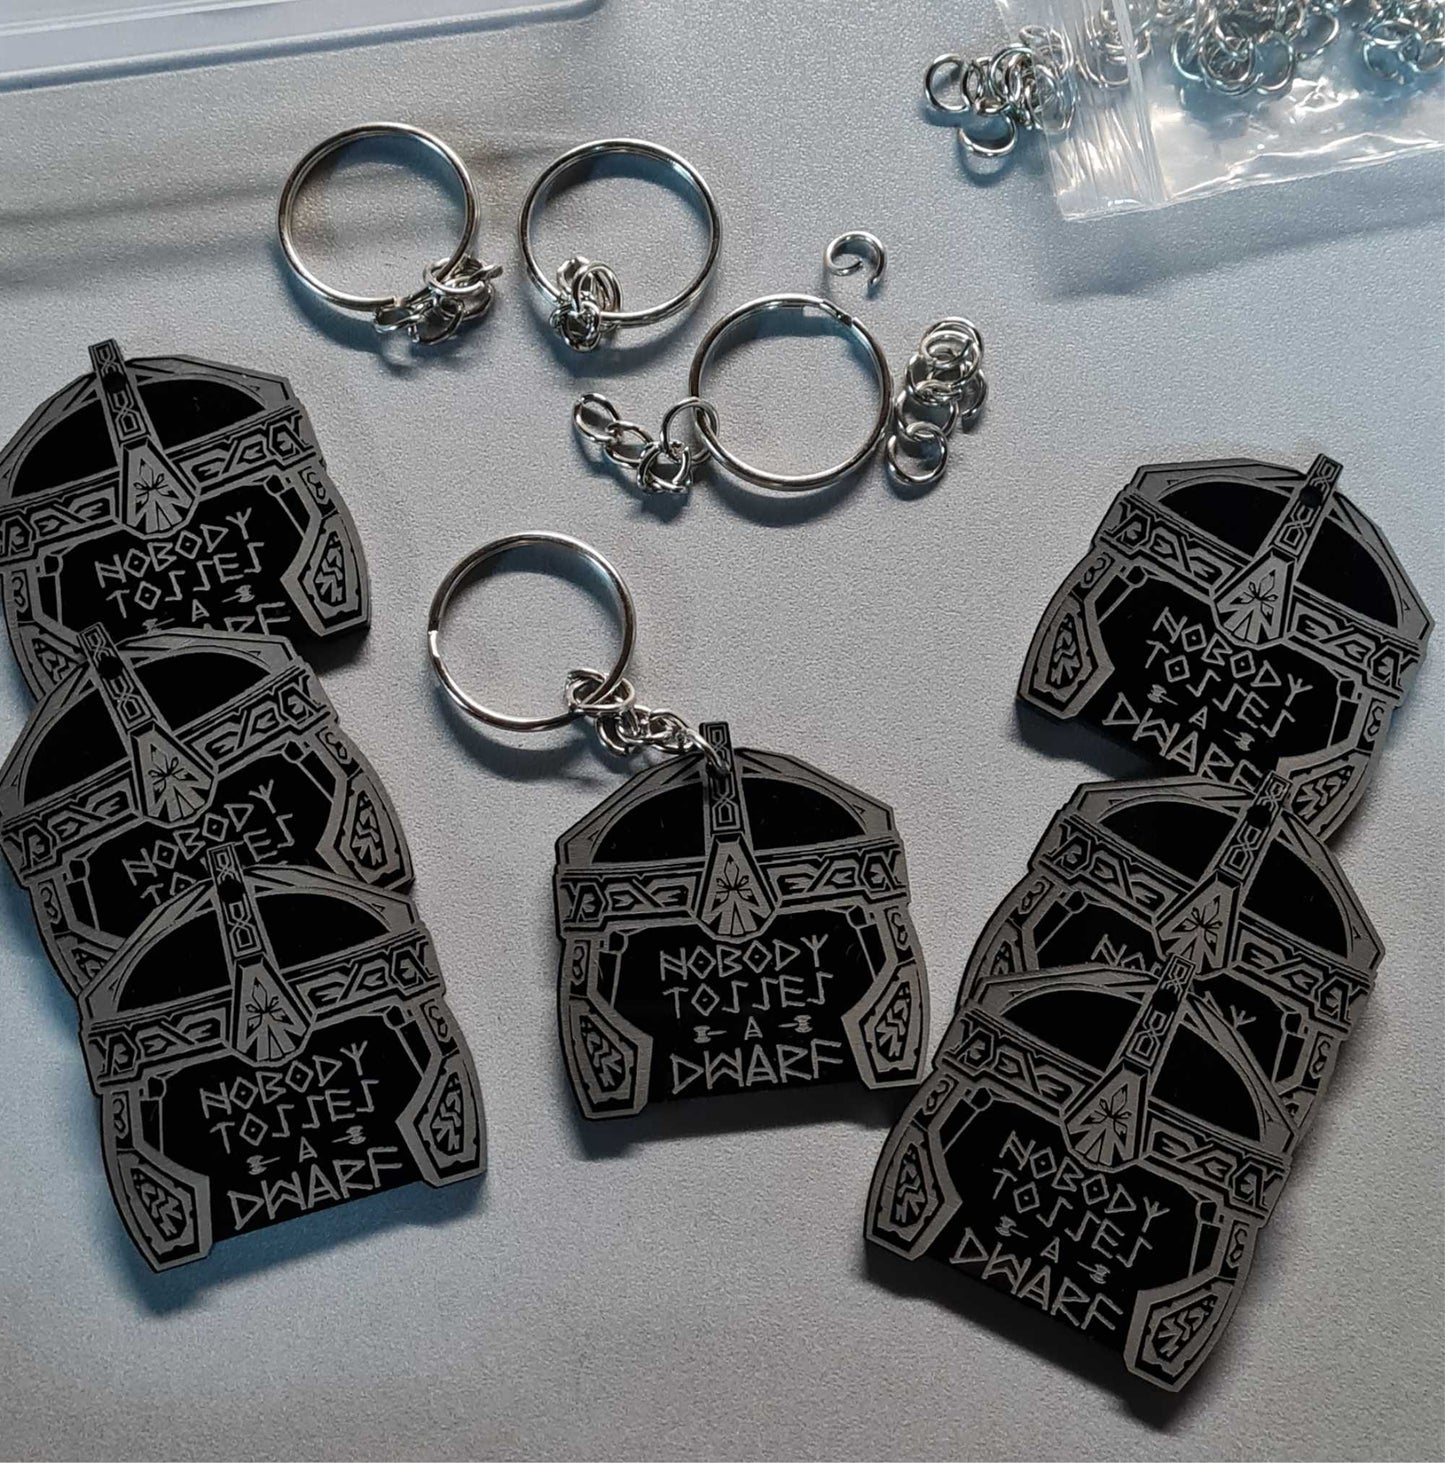 Lord of the Rings inspired Gimli Keyring - Nobody tosses a dwarf